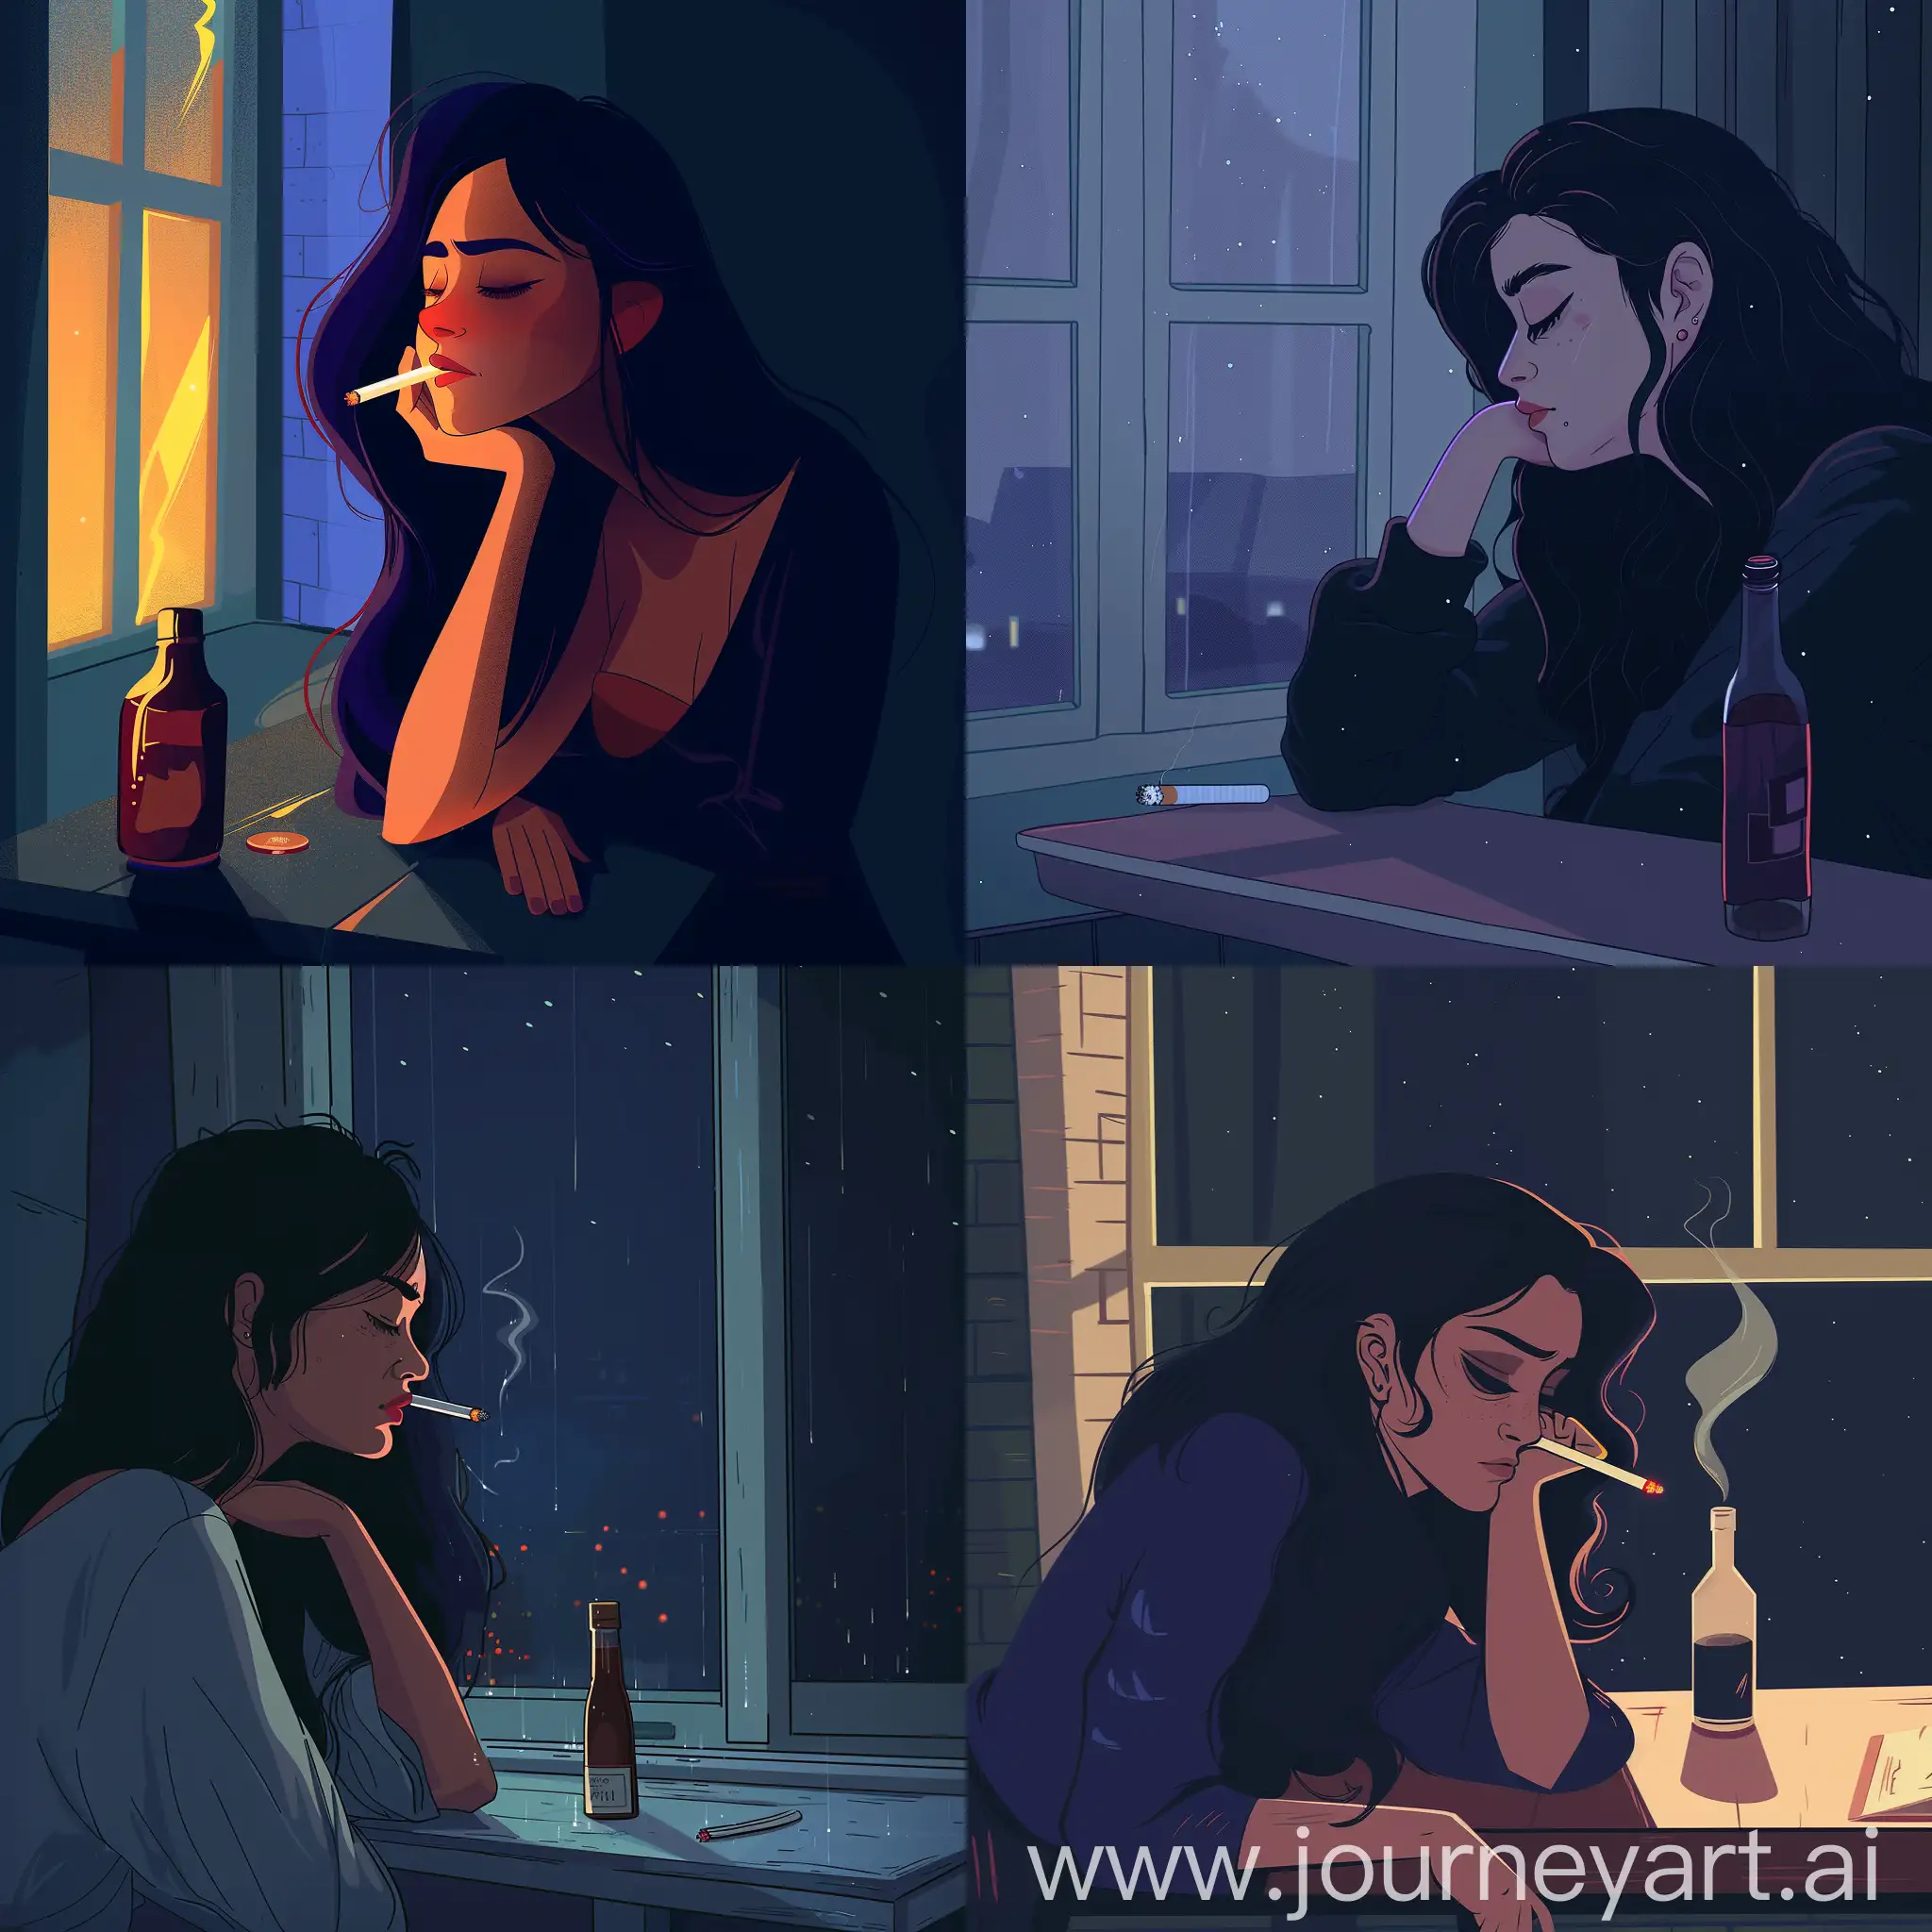 Noir-Inspired-Animated-Scene-of-a-Sad-Woman-with-a-Cigarette-by-a-Window-at-Night